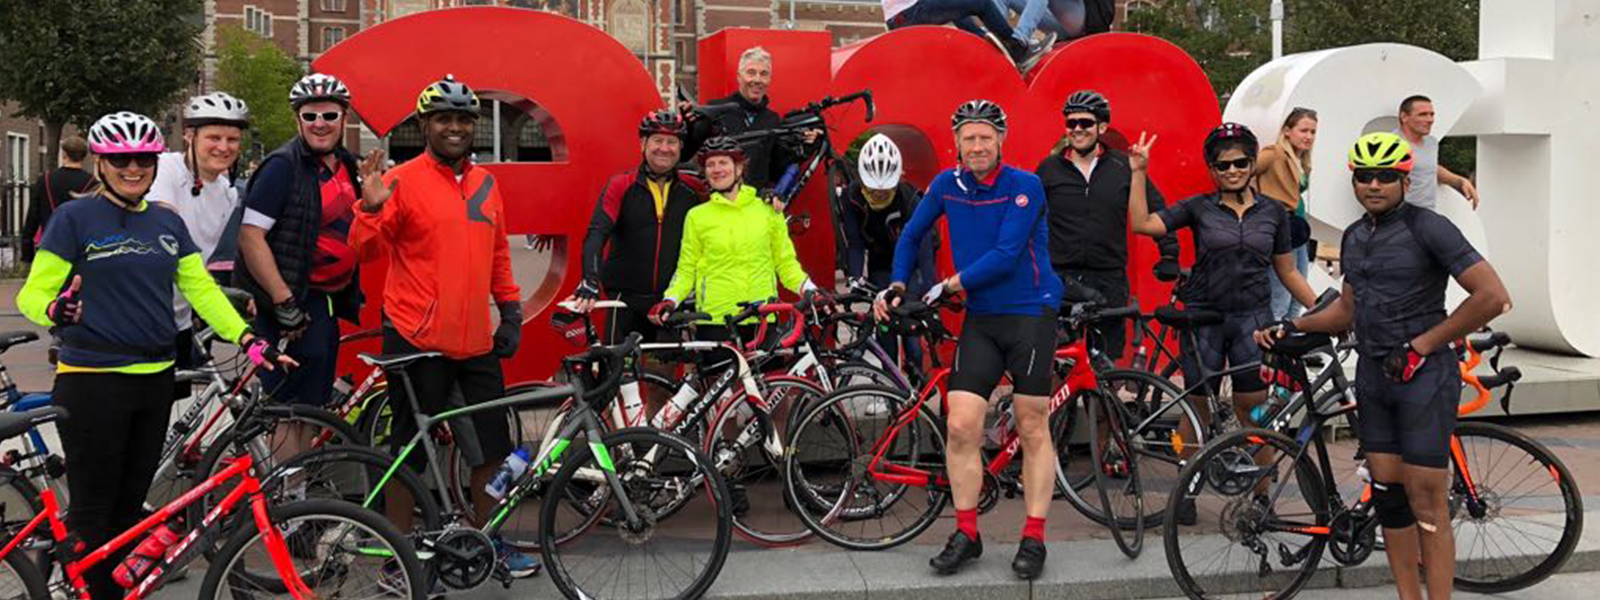 London to Amsterdam Cycling Challenge 